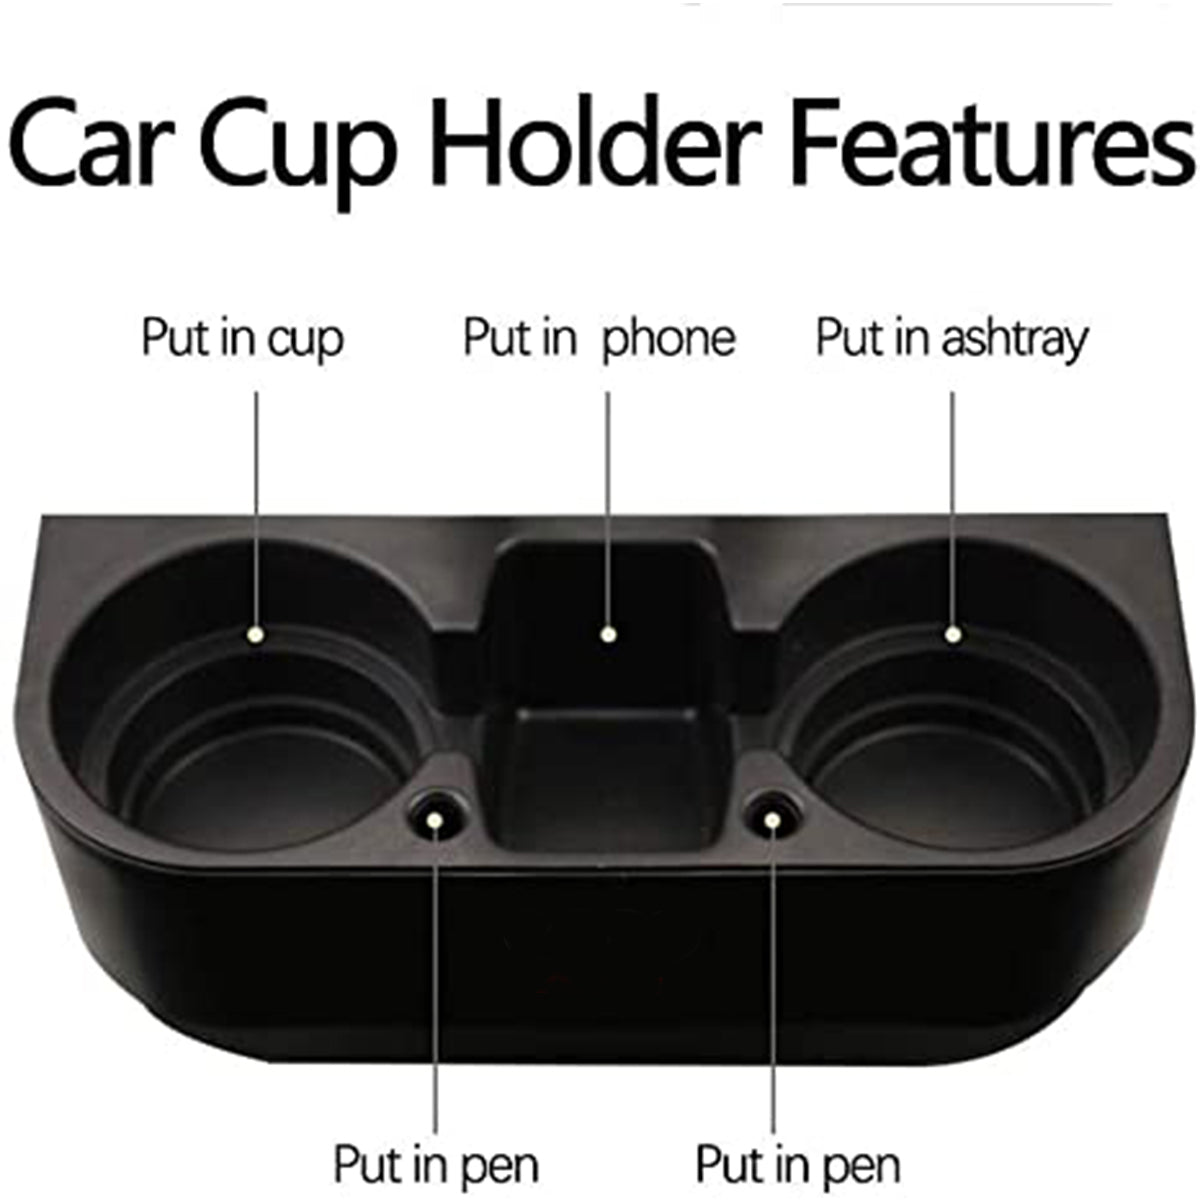 Delicate Leather Cup Holder Portable Multifunction Vehicle Seat Cup Cell Phone Drinks Holder Box Car Interior Organizer, Custom For Your Cars, Car Accessories TY11995 - Delicate Leather